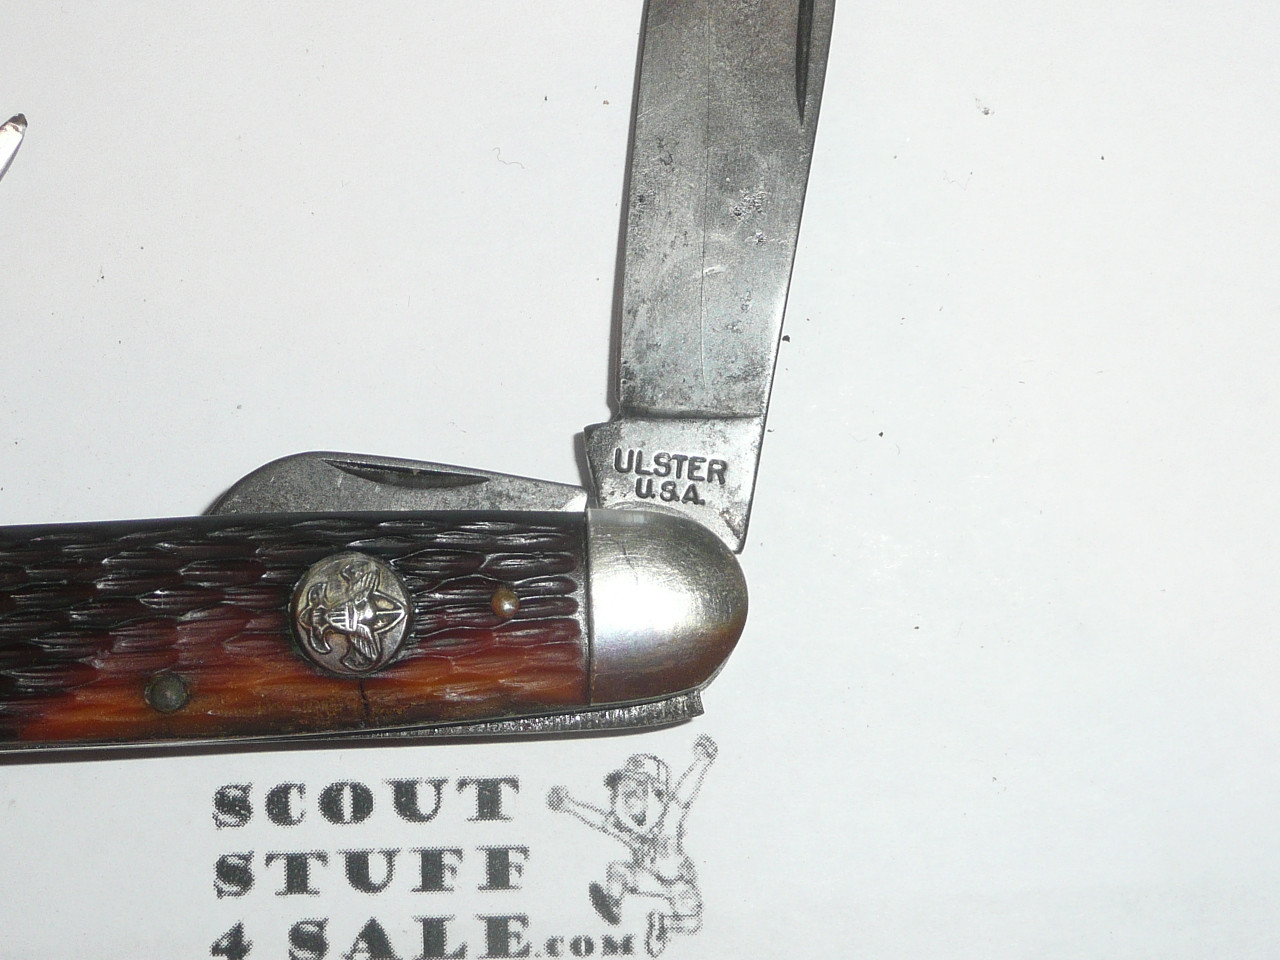 Boy Scout Knife, Ulster Manufacturer, Litely Used, BS008